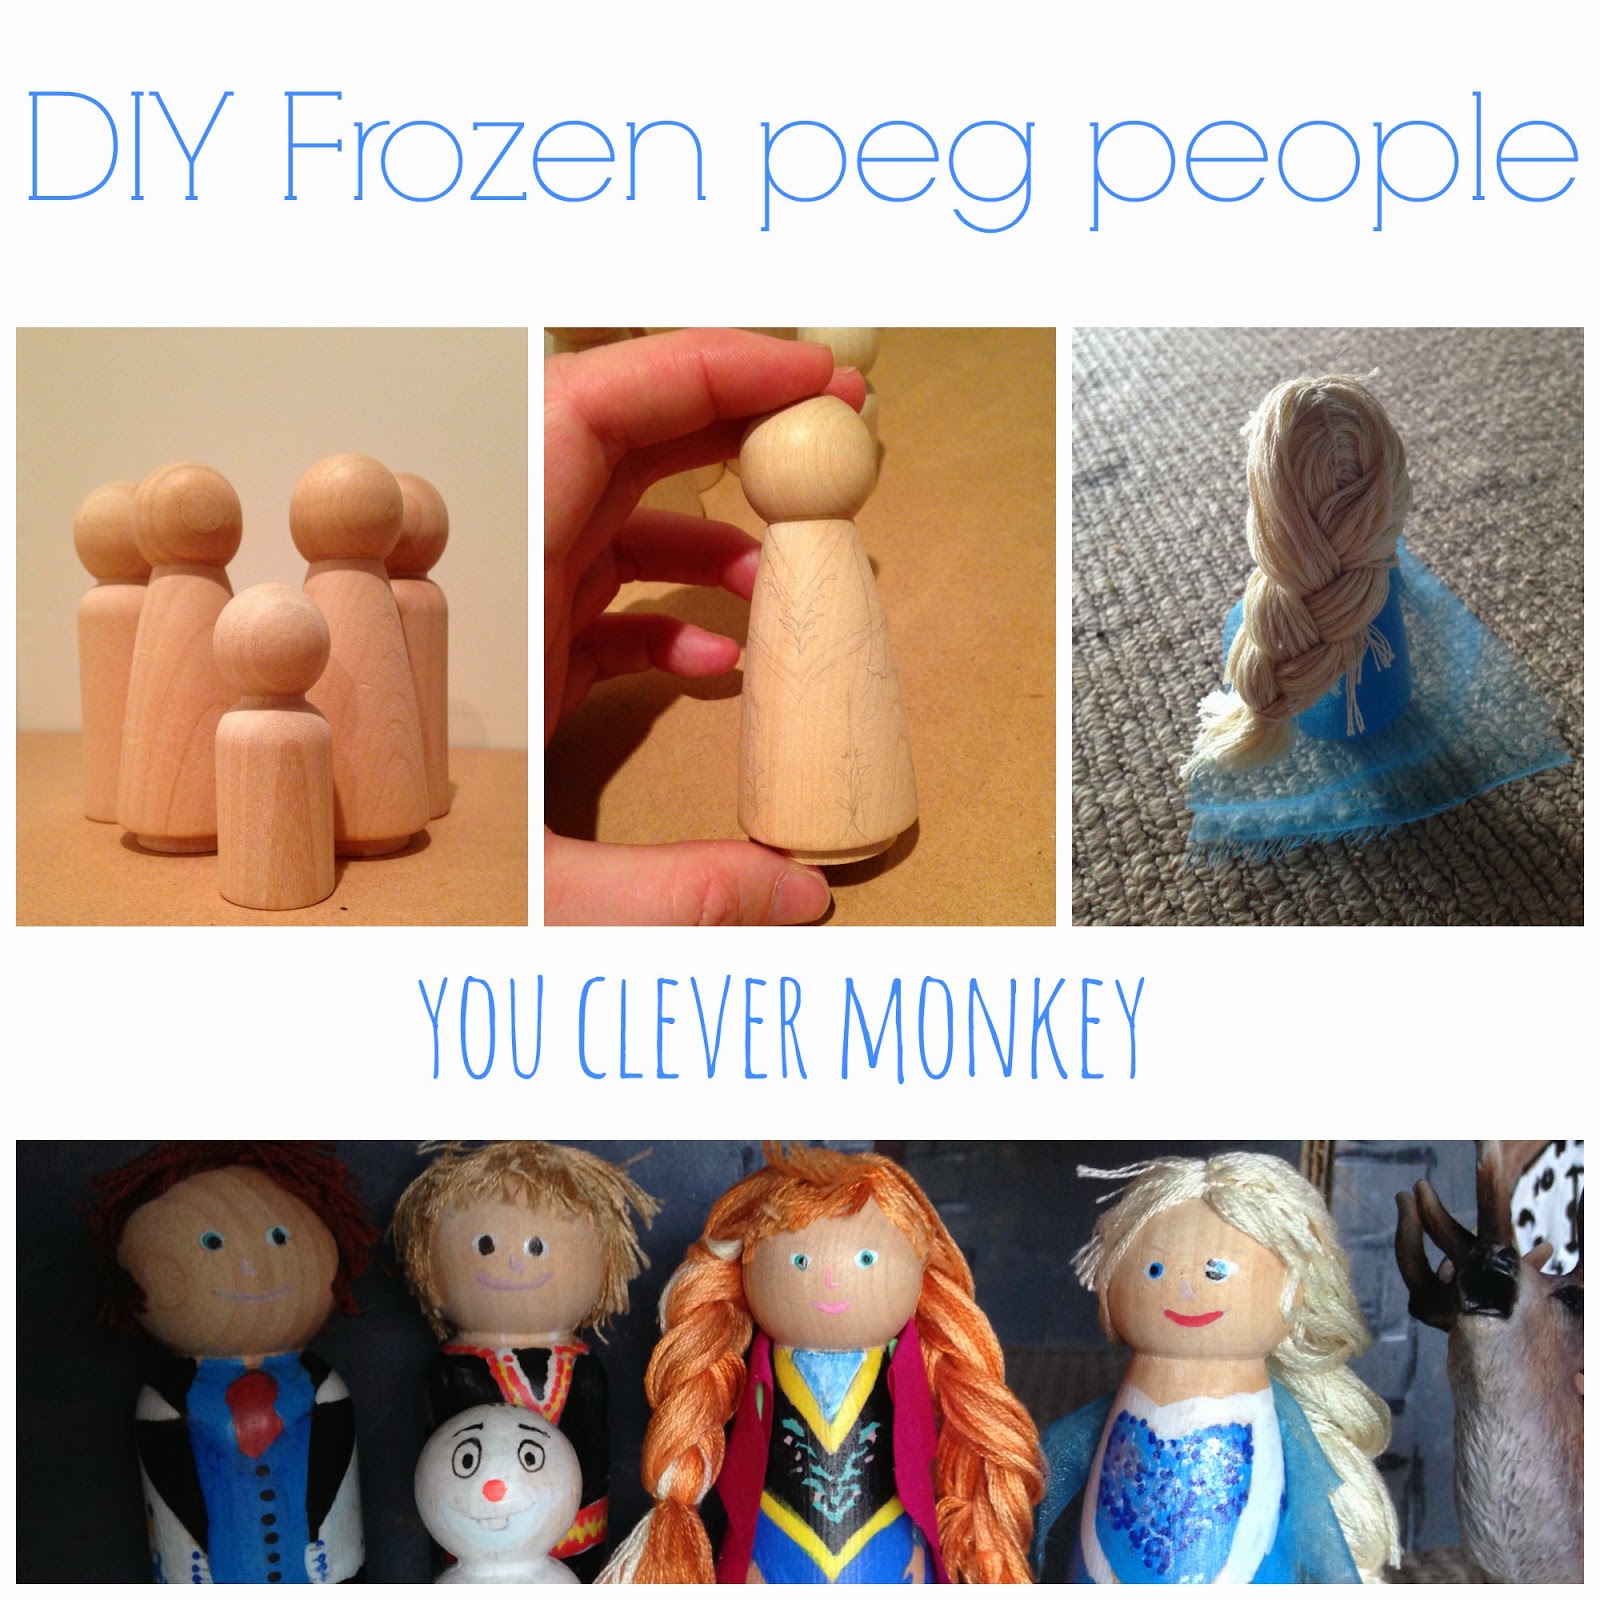 DIY Frozen Peg People - how to make your own Frozen characters for play from simple wooden peg dolls. Step by step instructions to help you create your own | you clever monkey